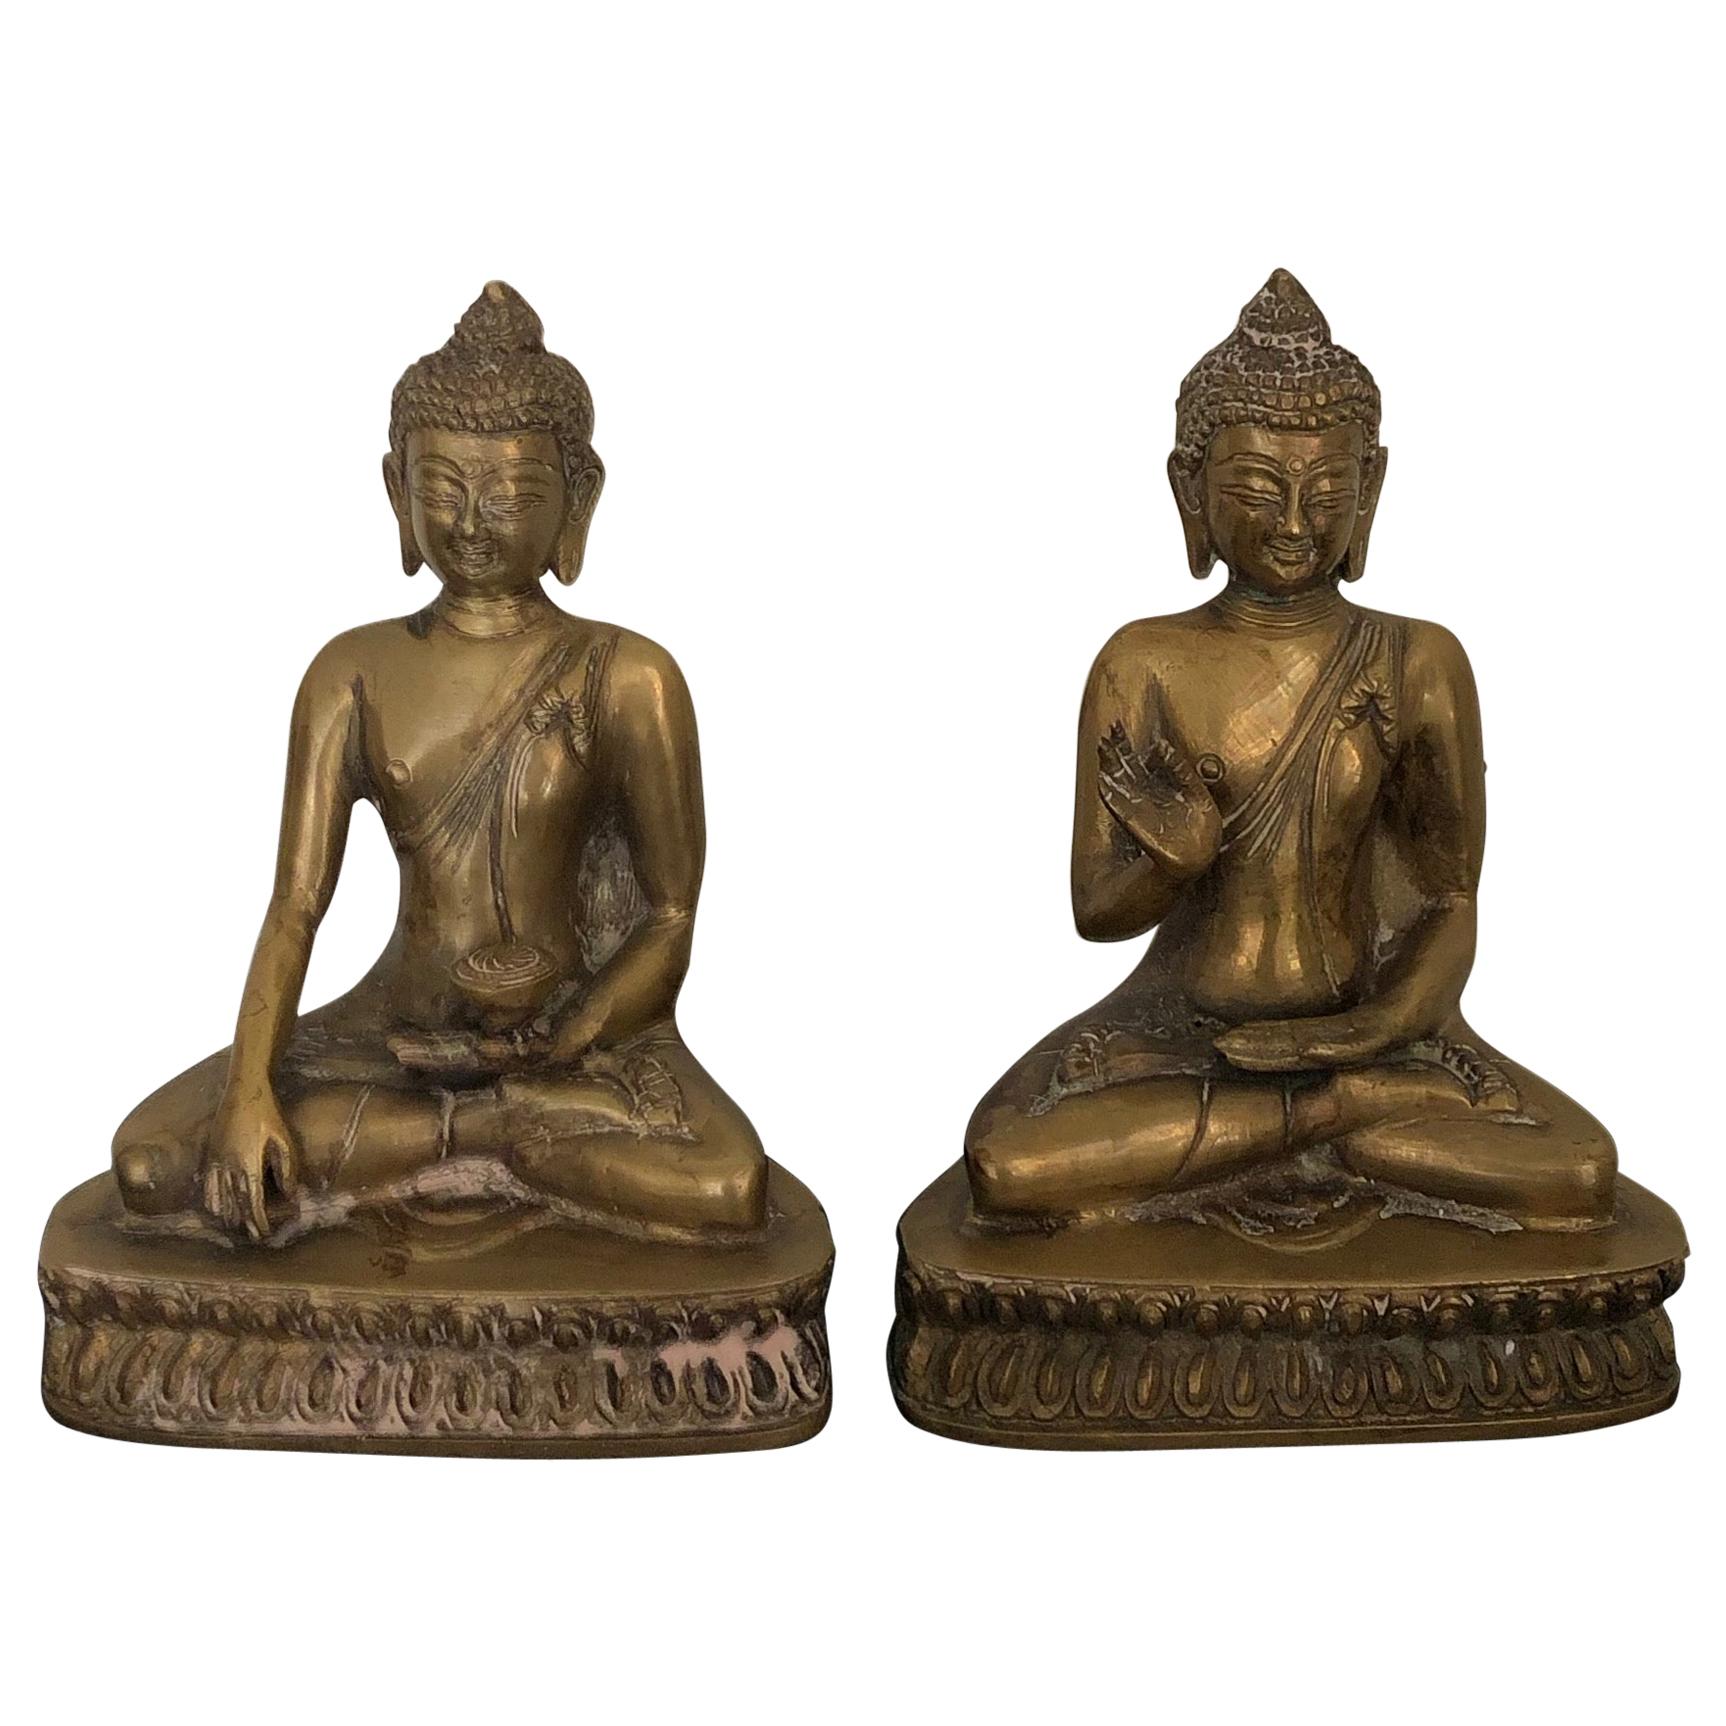 Two Vintage 20th Century Golden Brass Buddah Book ends Bookcase Decoration